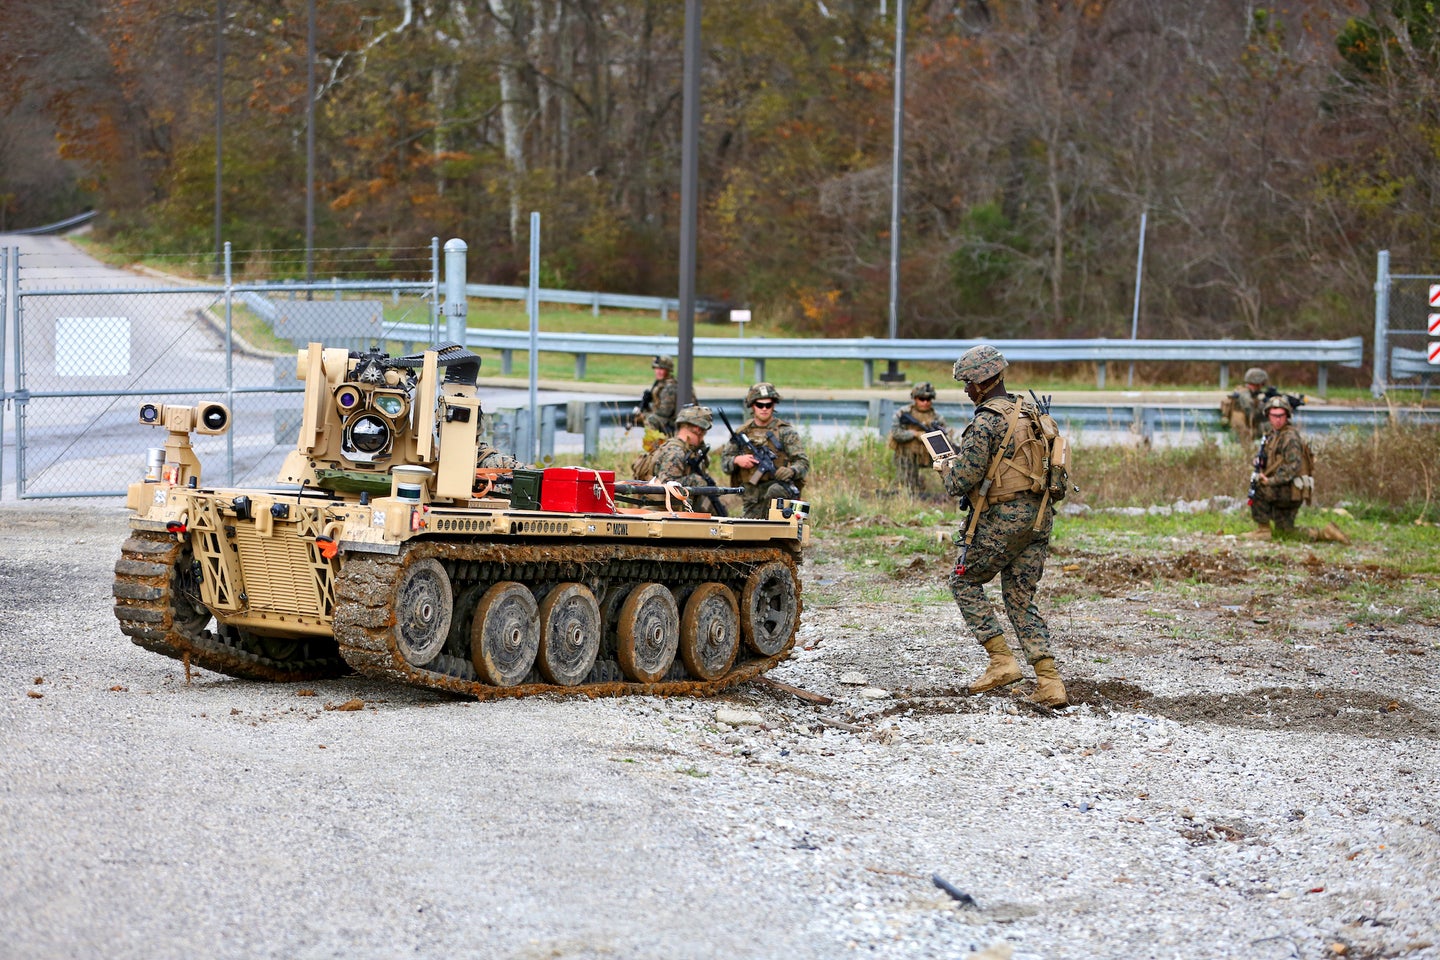 An American robotic vehicle seen in 2018 in Indiana. It's an Expeditionary Modular Autonomous Vehicle, or EMAV.